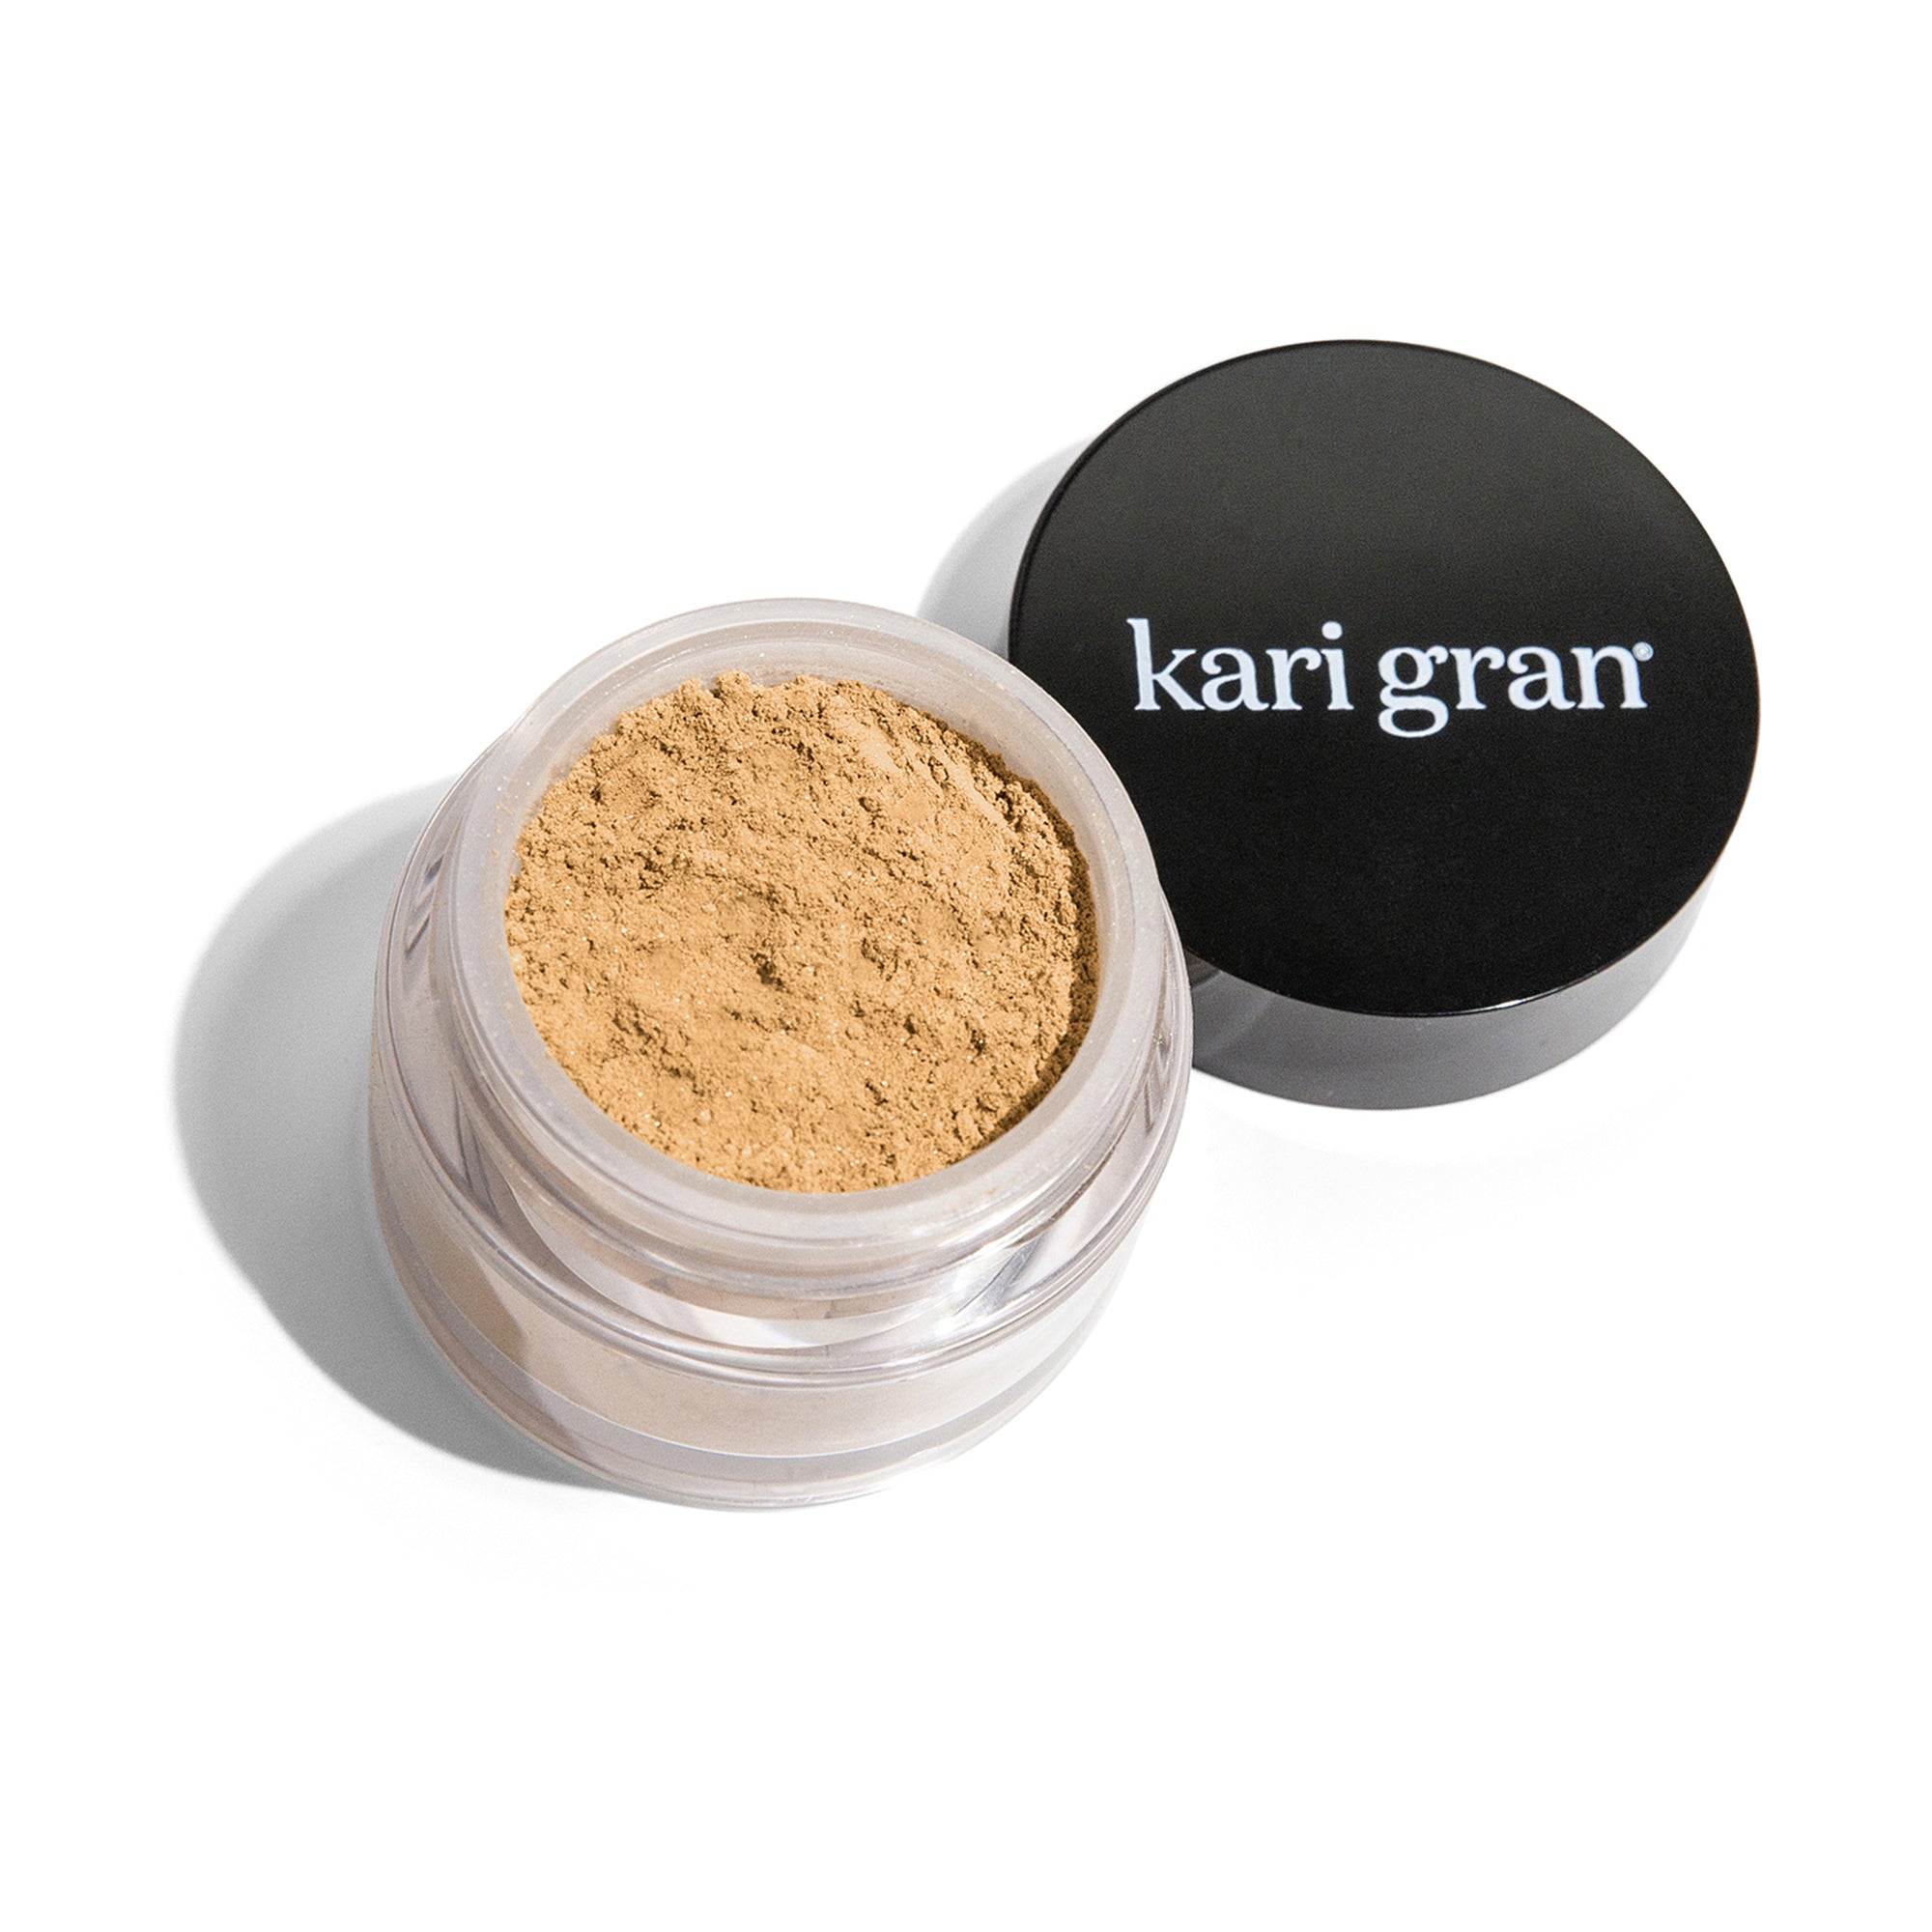 Kari Gran Mineral Powder Foundation with cap on the side